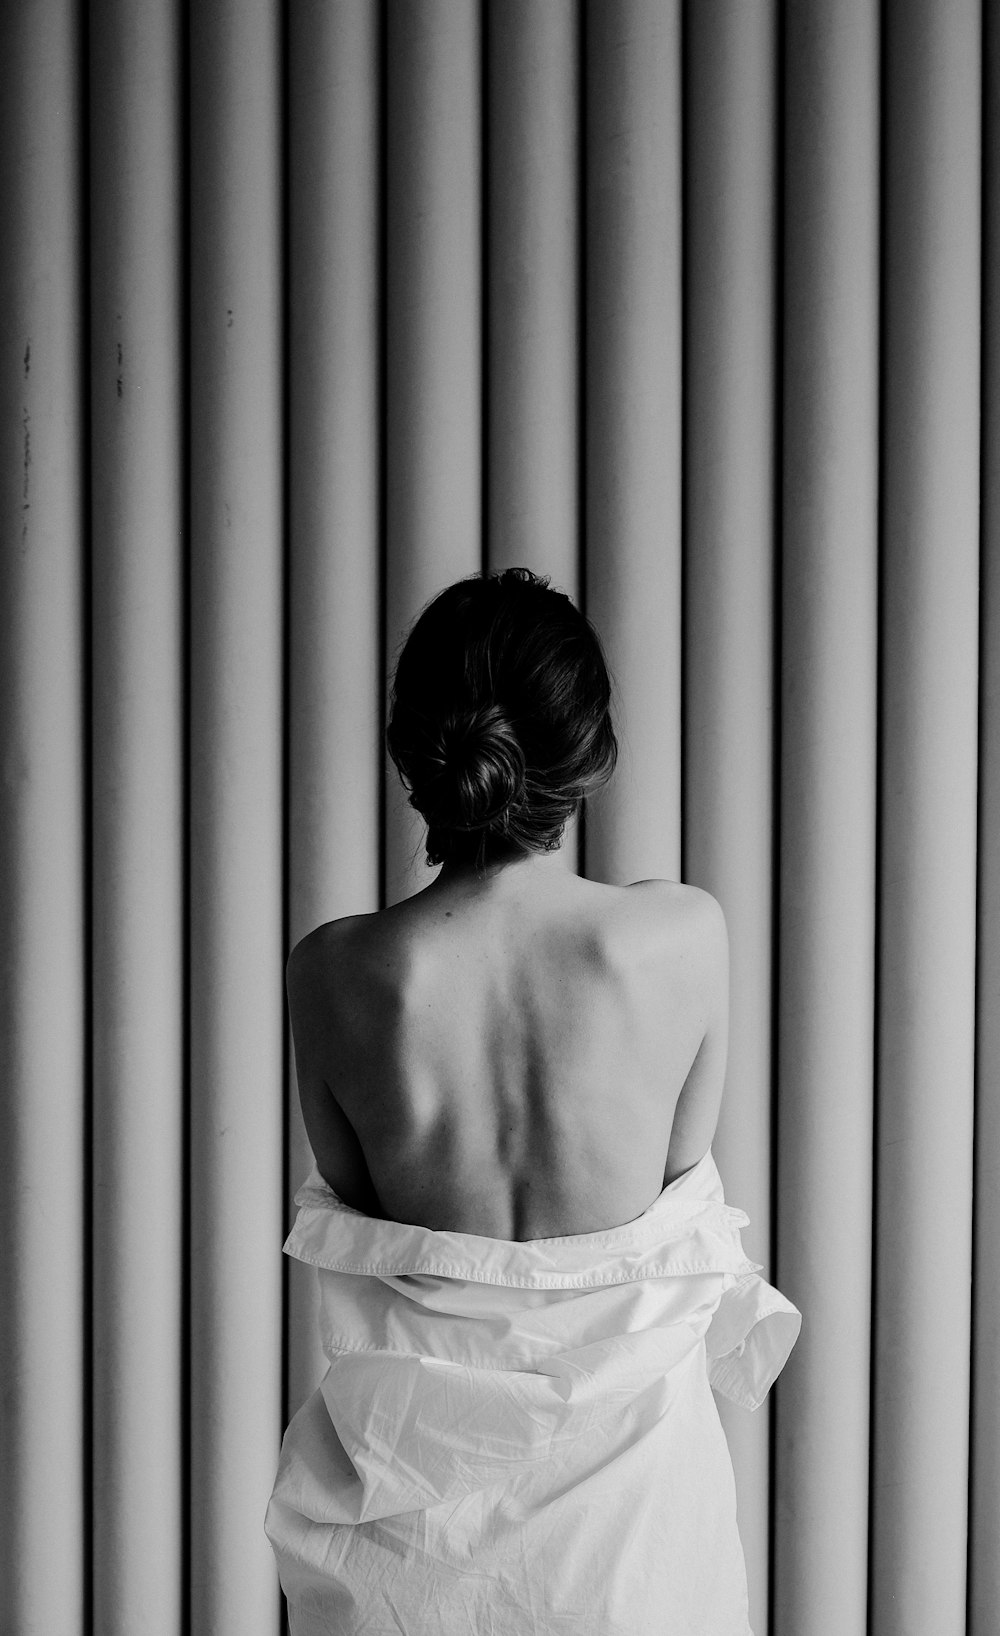 back of a person in a white dress